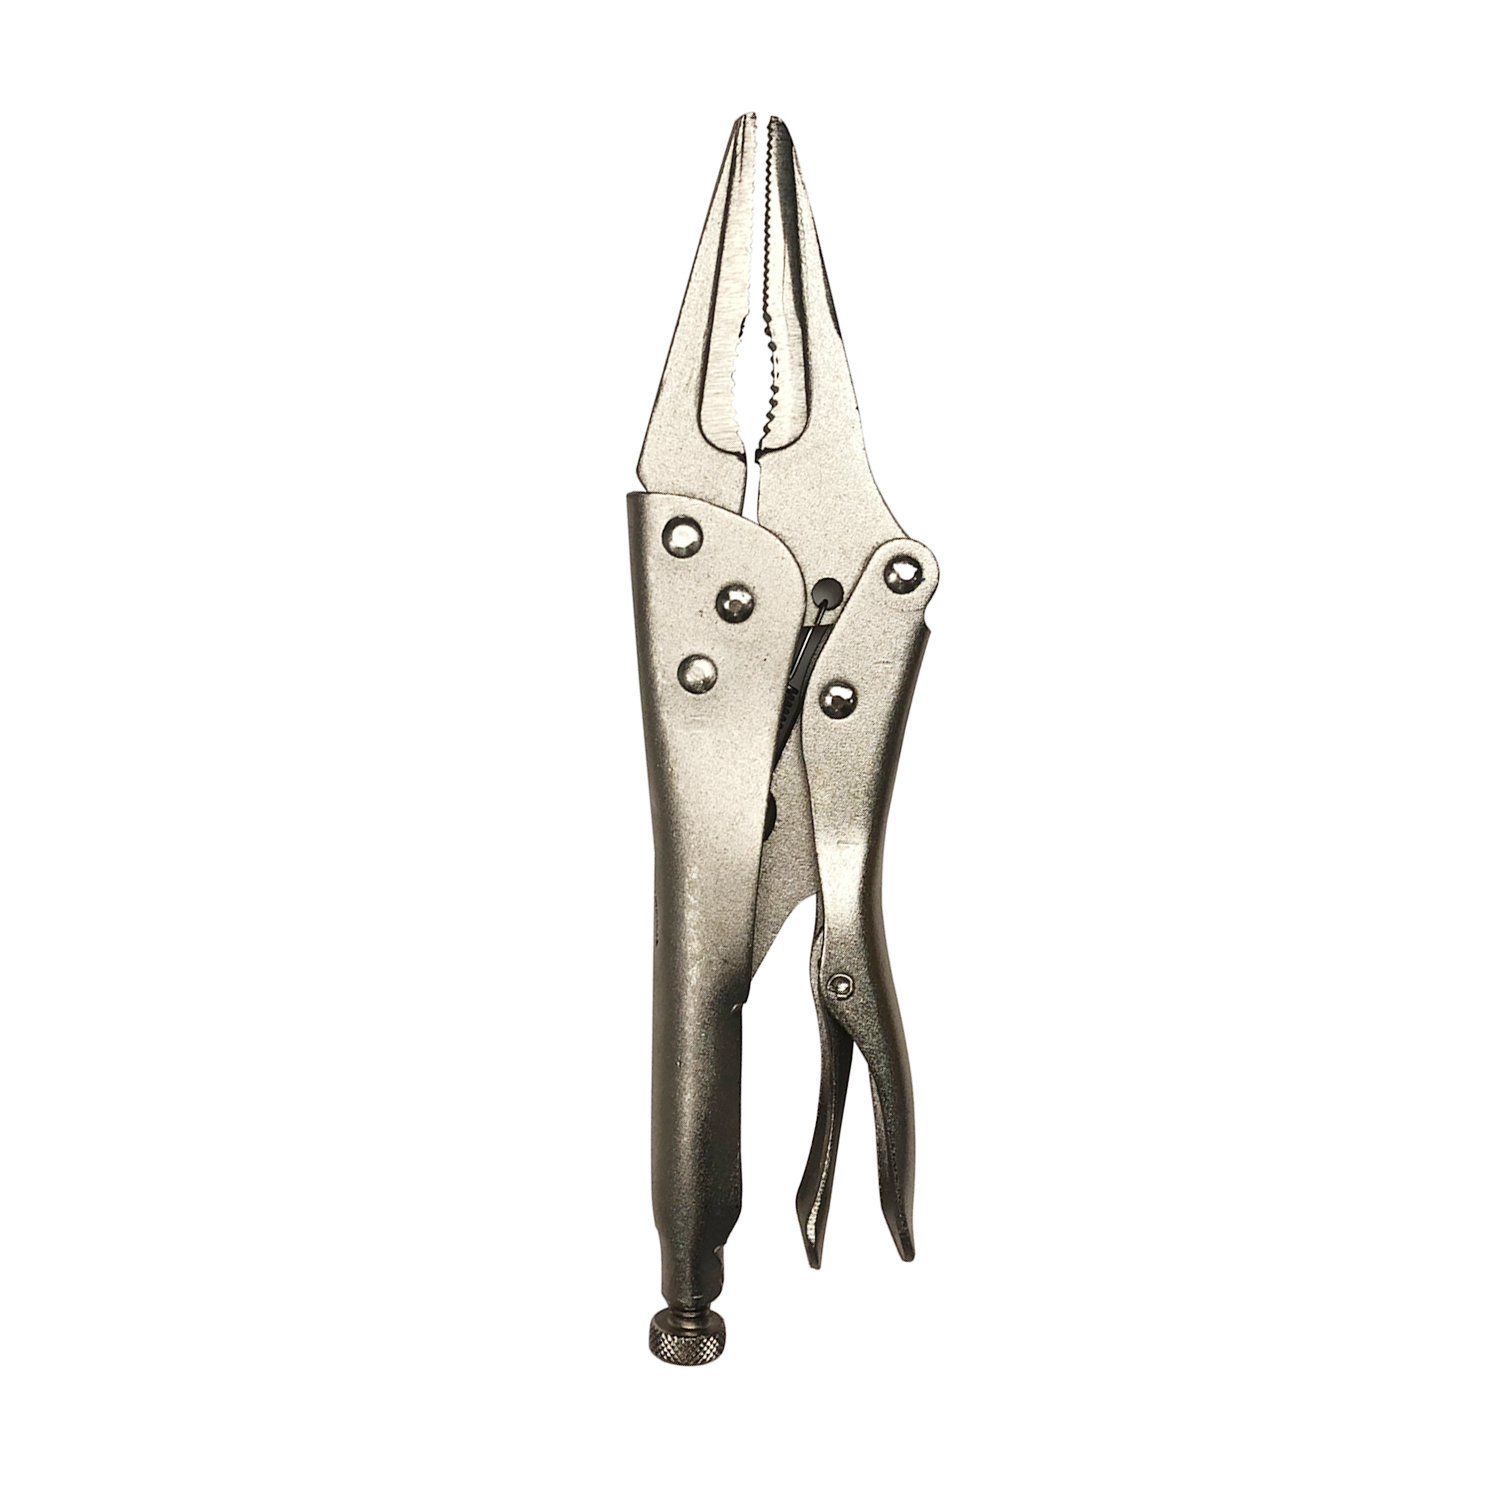 9 Inch Long Nose Locking Cutting Pliers Straight Jaws For Tightening Clamping Twisting Turning Flat Objects